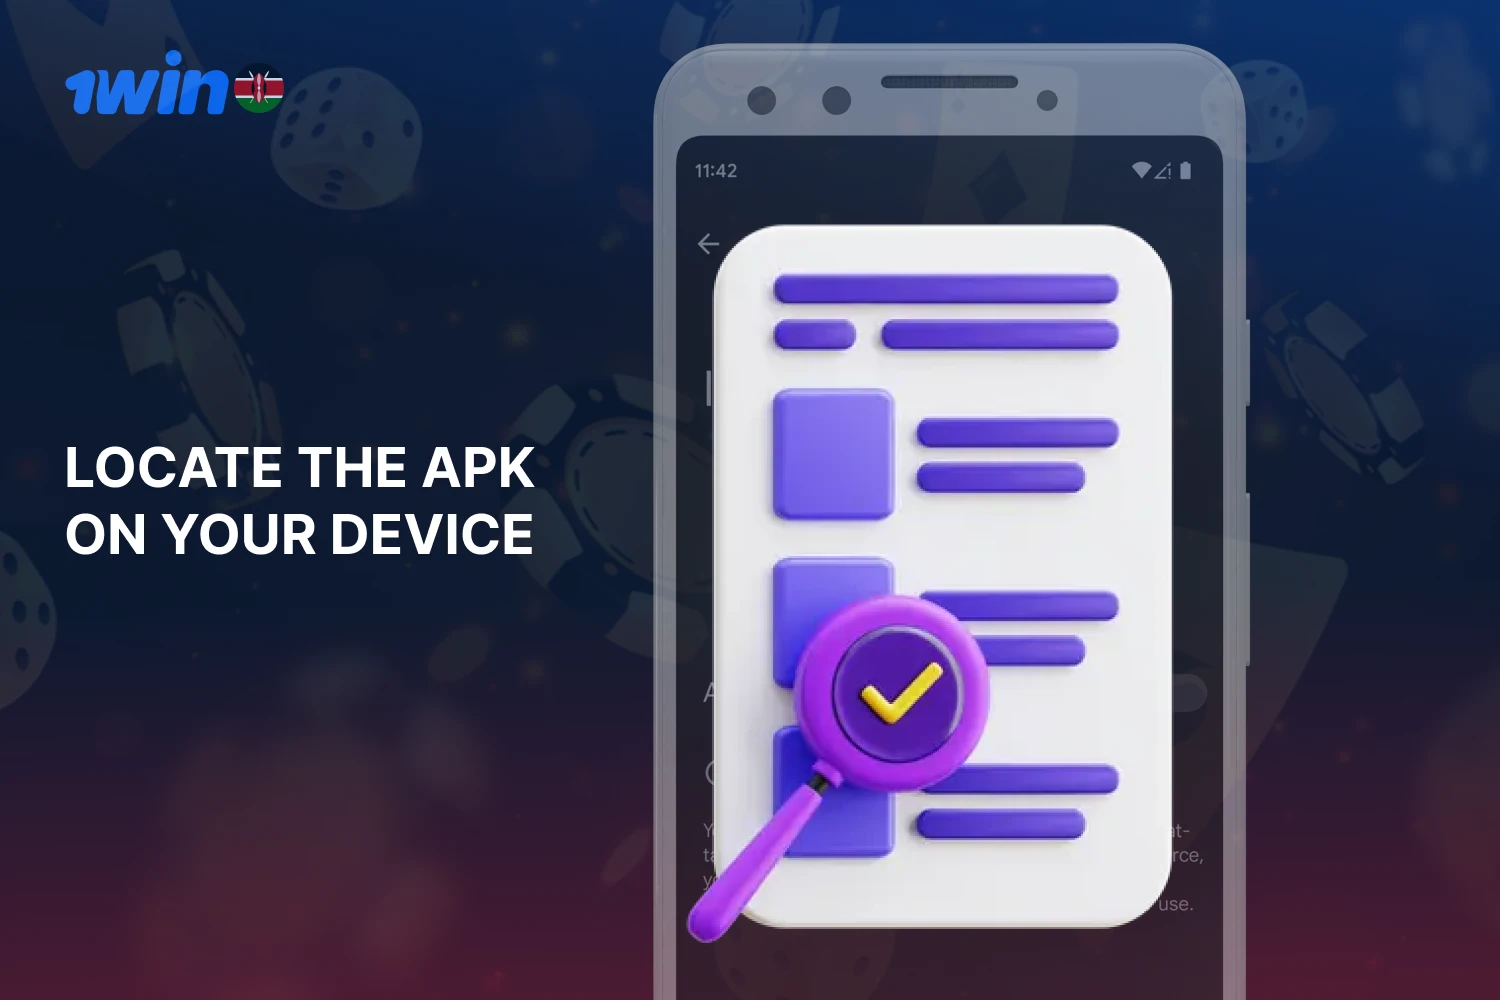 Locate the 1win apk on your device